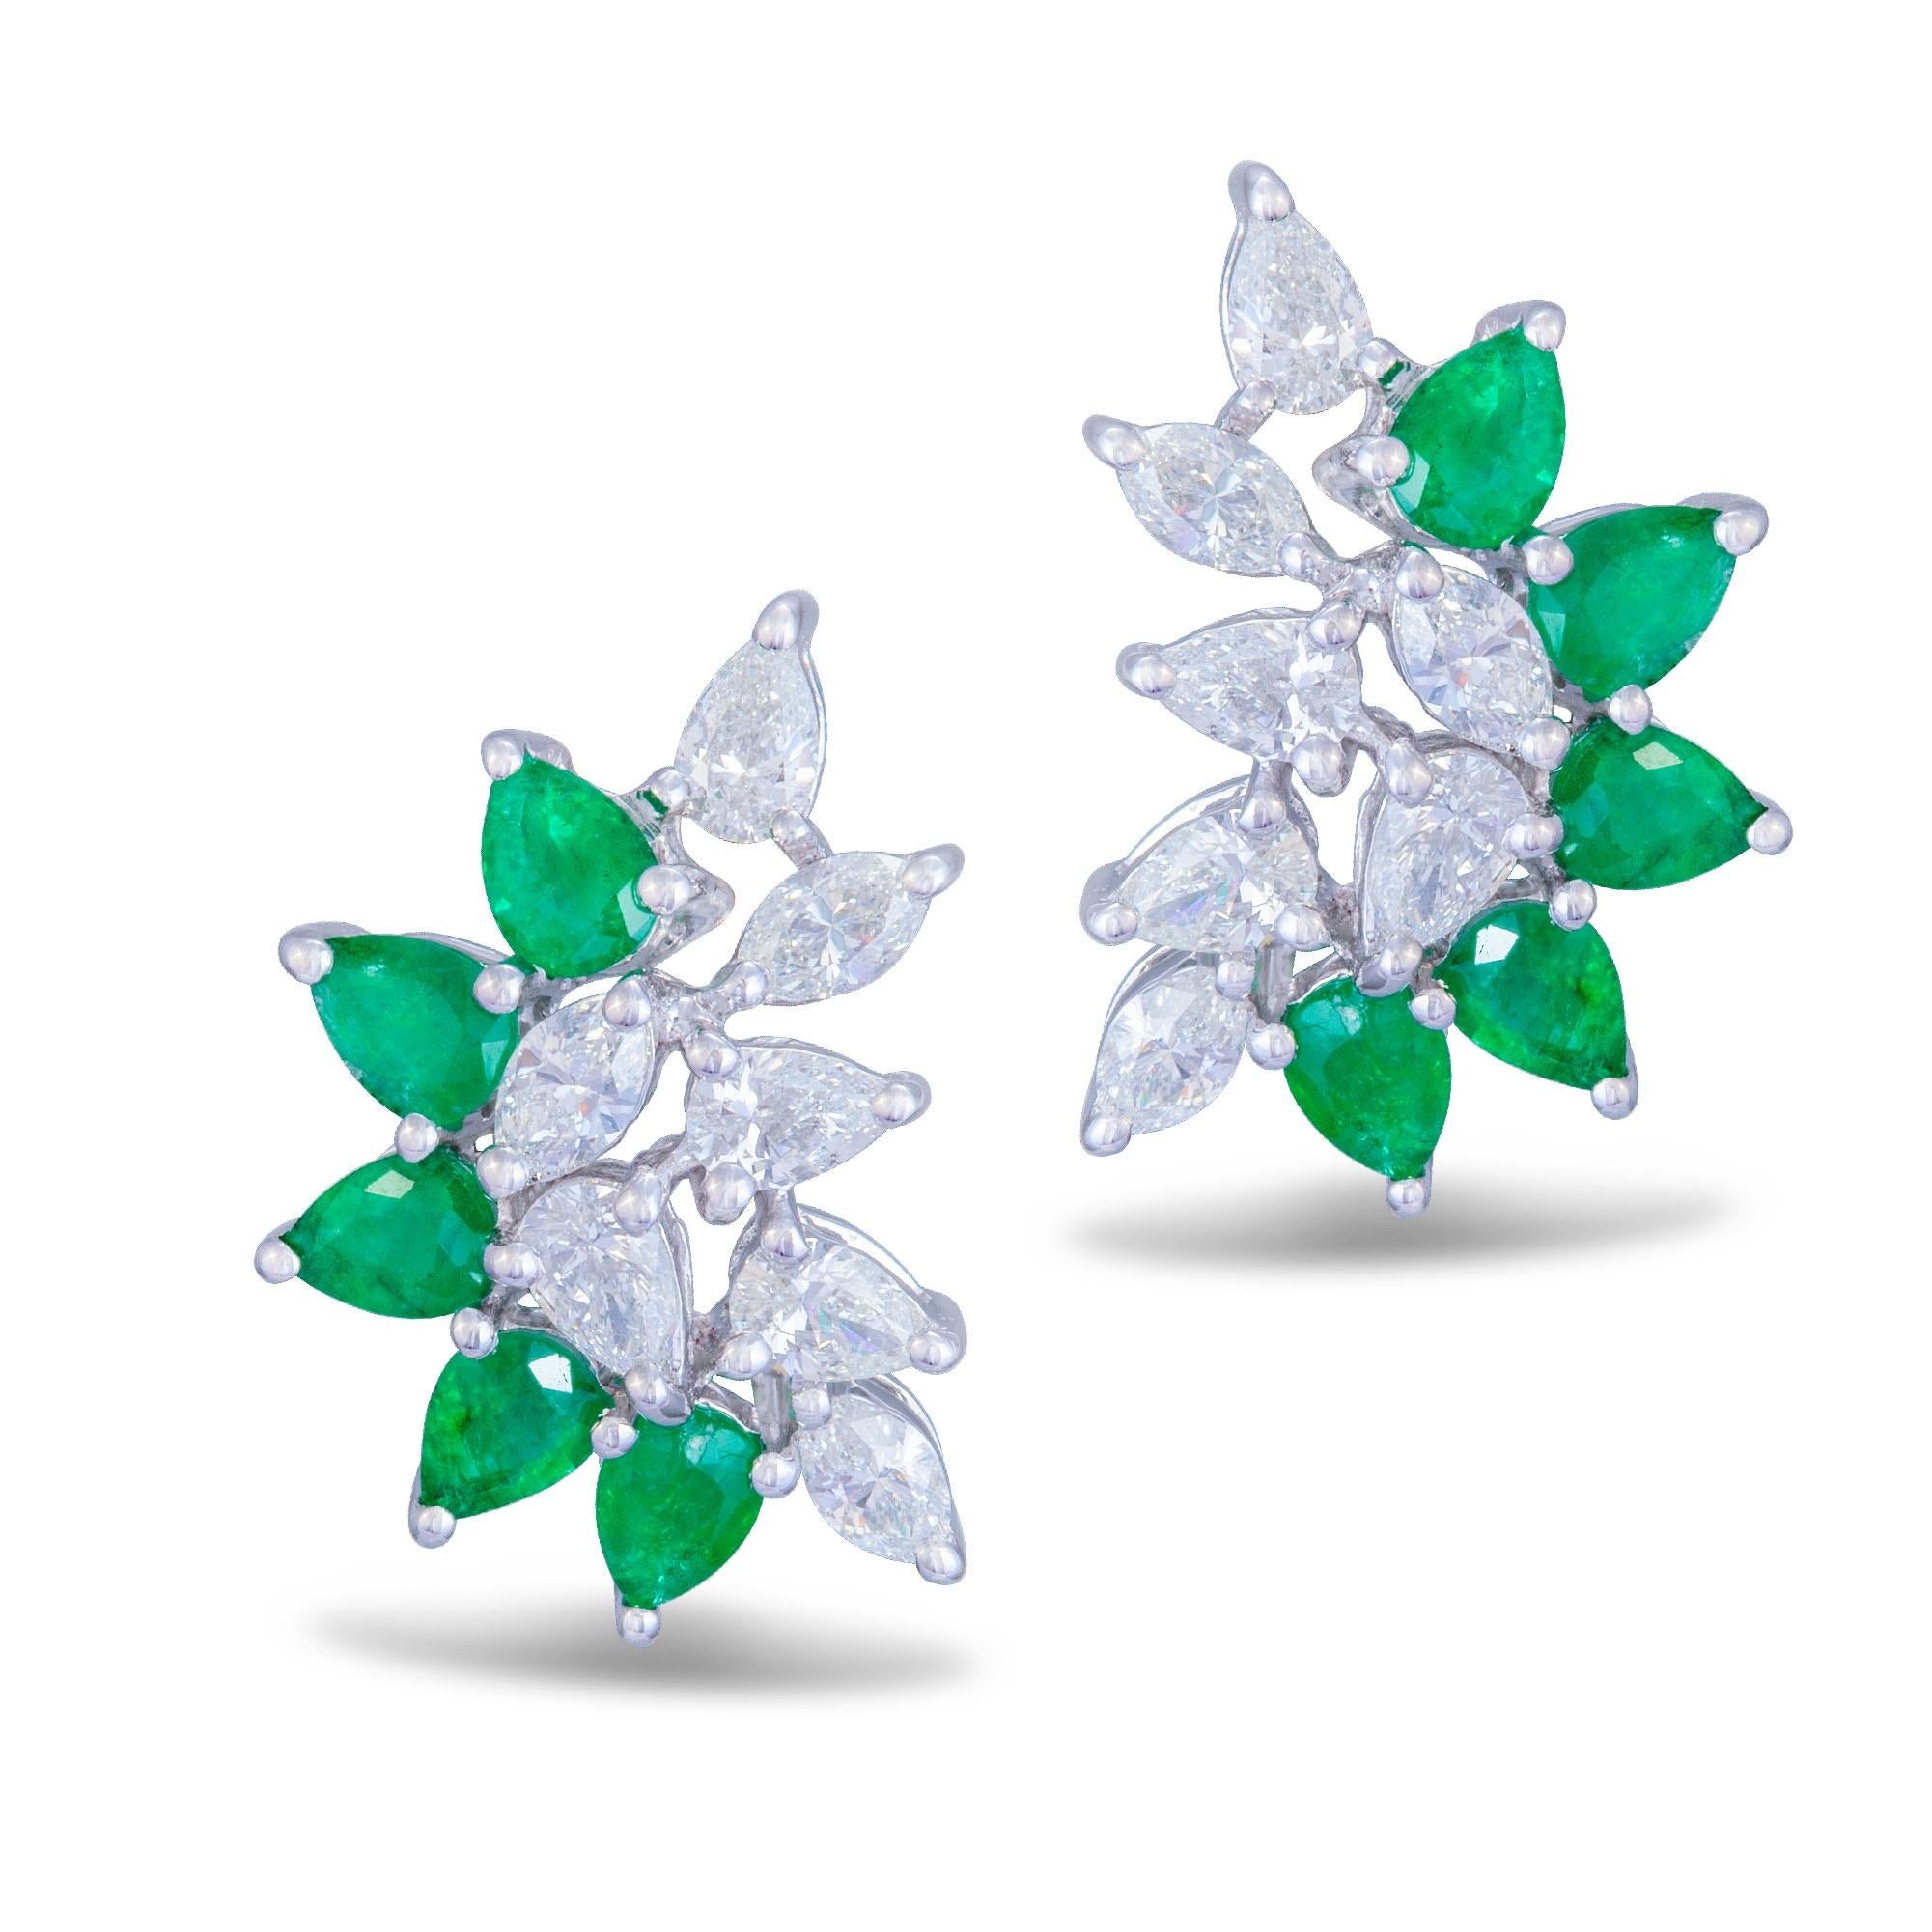 EARRINGS 18K White Gold
Emerald 1.35 Cts/10 Pieces 
MQ 0.49 Cts/6 Pieces 
PE 0.67 Cts/8 Pieces

With a heritage of ancient fine Swiss jewelry traditions, NATKINA is a Geneva based jewellery brand, which creates modern jewellery masterpieces suitable